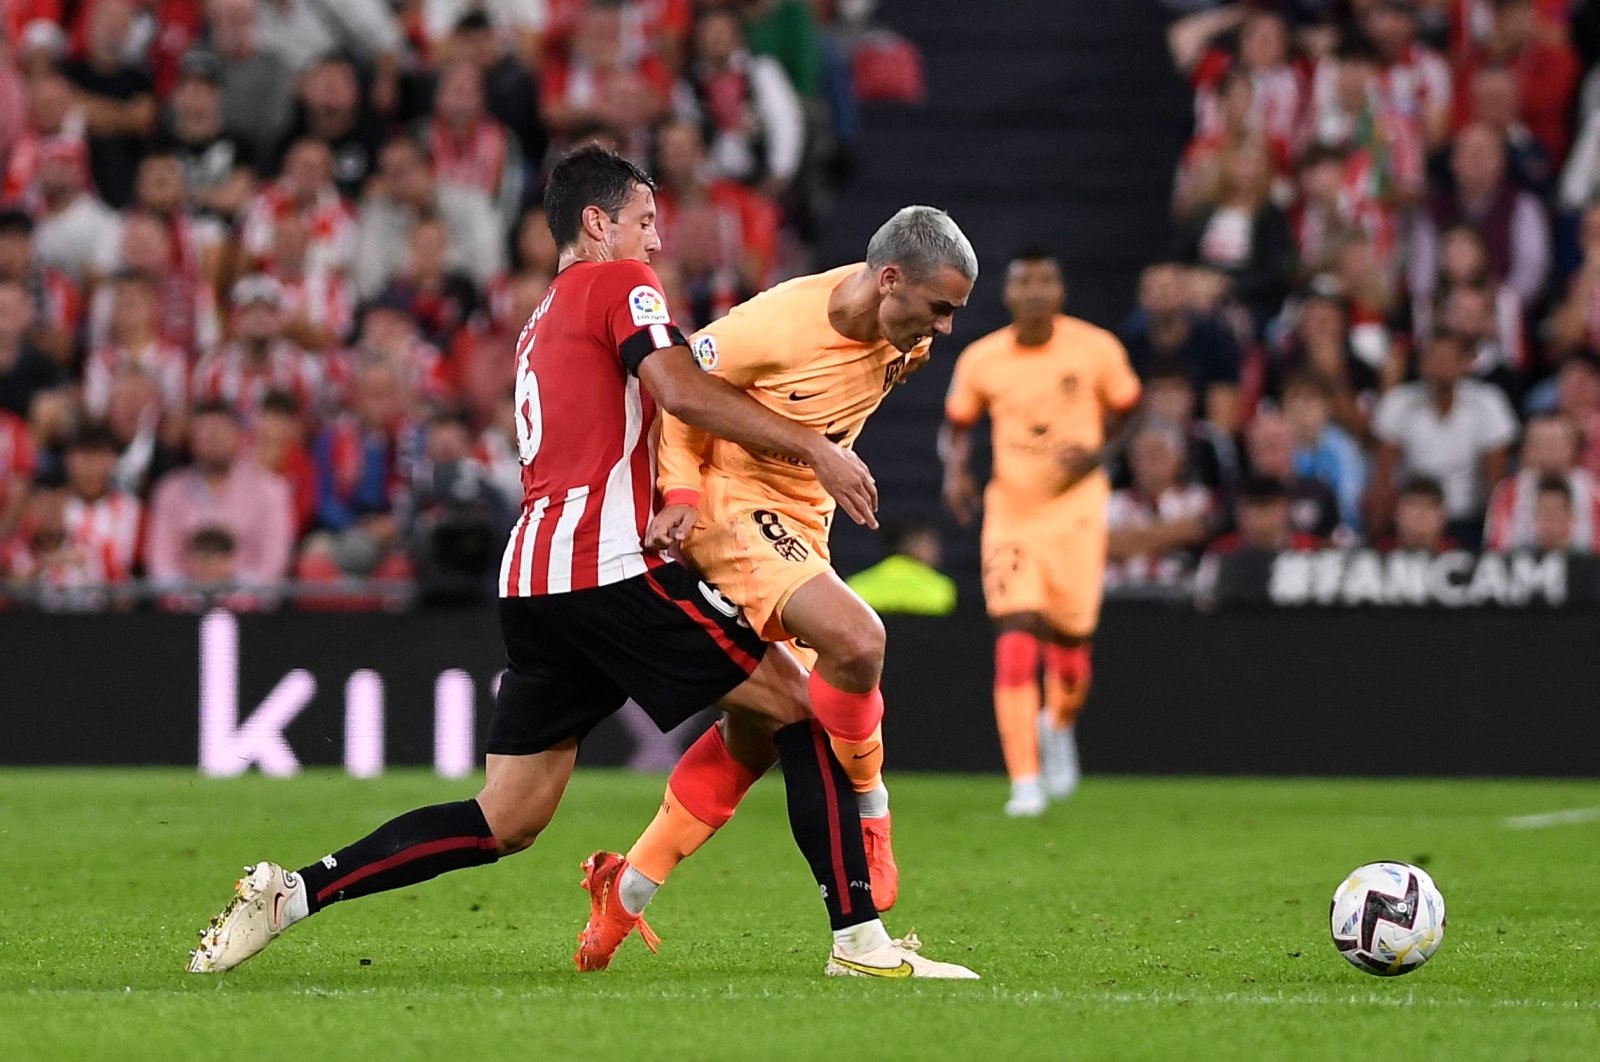 Antoine Griezmann (R) vies with Mikel Vesga during La Liga match between Athletic Club Bilbao and Club Atletico de Madrid at the San Mames stadium, Bilbao, Oct. 15, 2022. (AFP Photo)